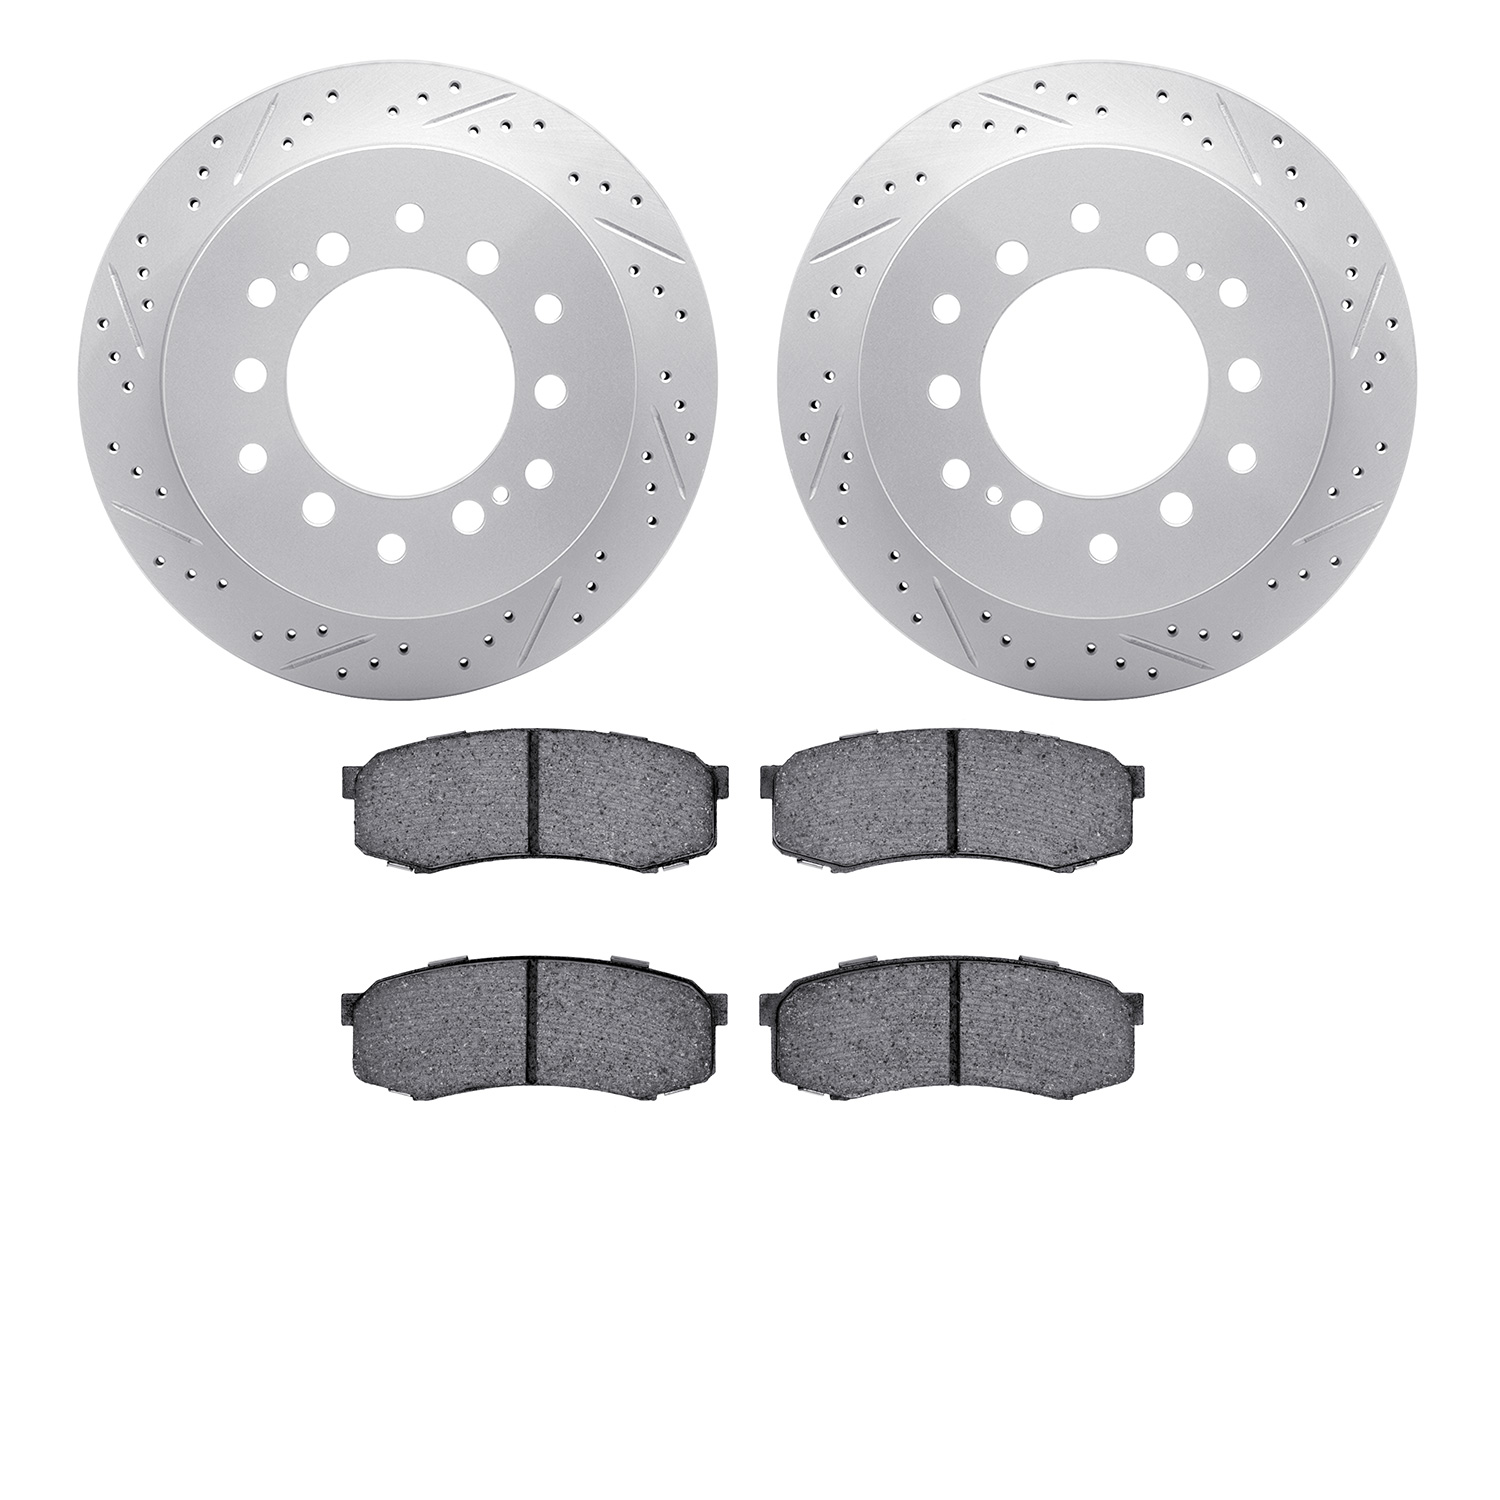 2402-76010 Geoperformance Drilled/Slotted Brake Rotors with Ultimate-Duty Brake Pads Kit, 2001-2009 Lexus/Toyota/Scion, Position